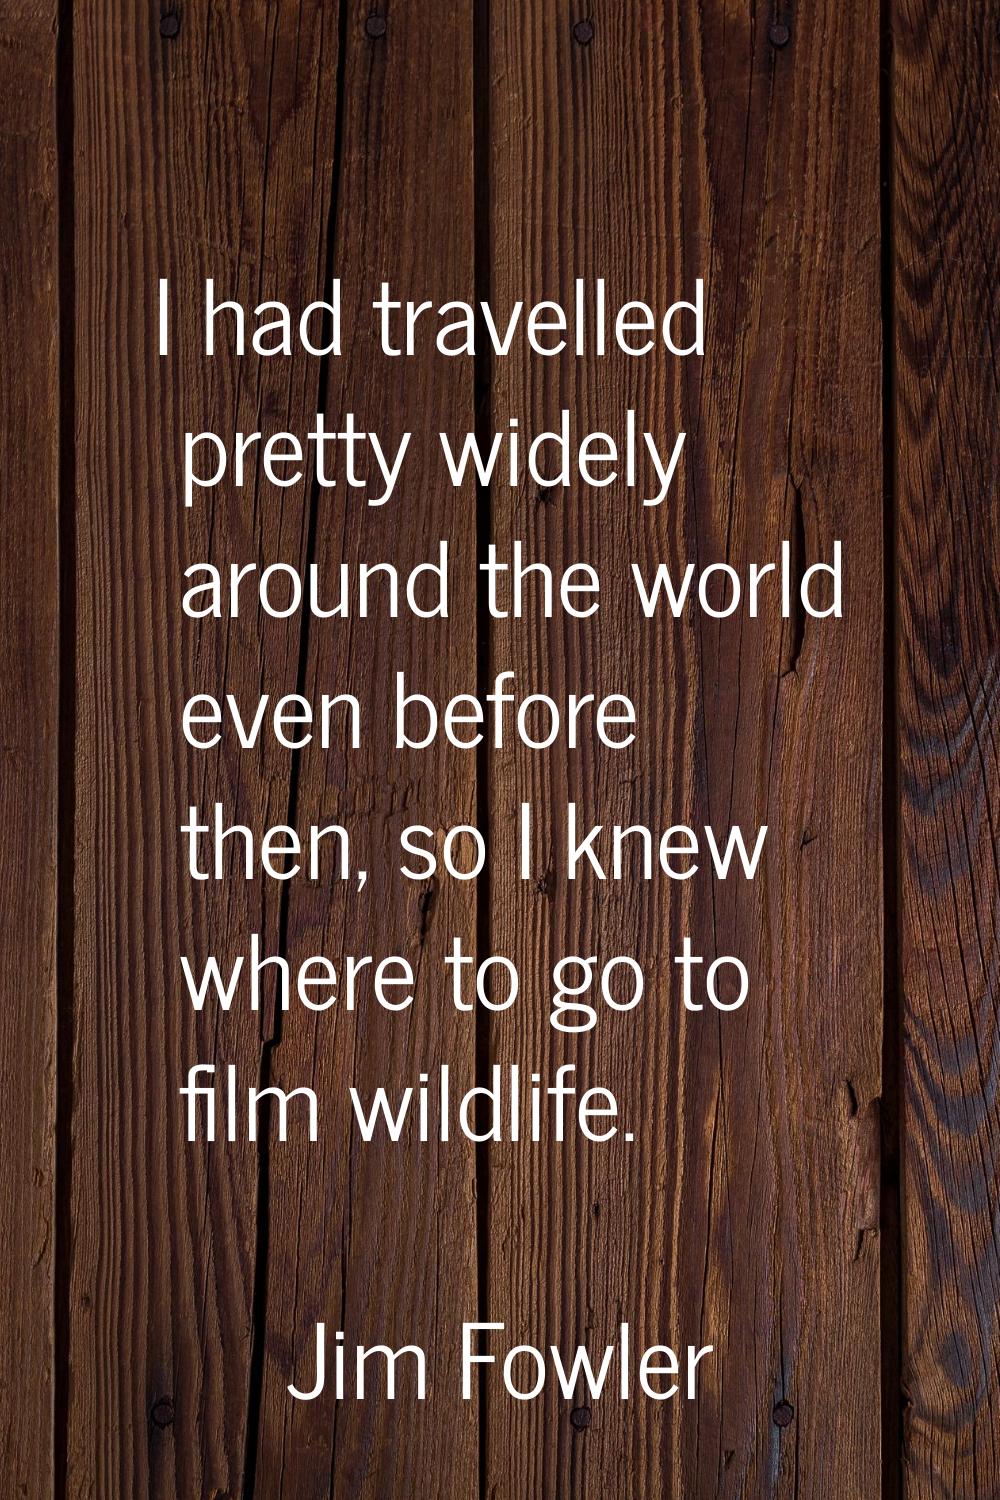 I had travelled pretty widely around the world even before then, so I knew where to go to film wild